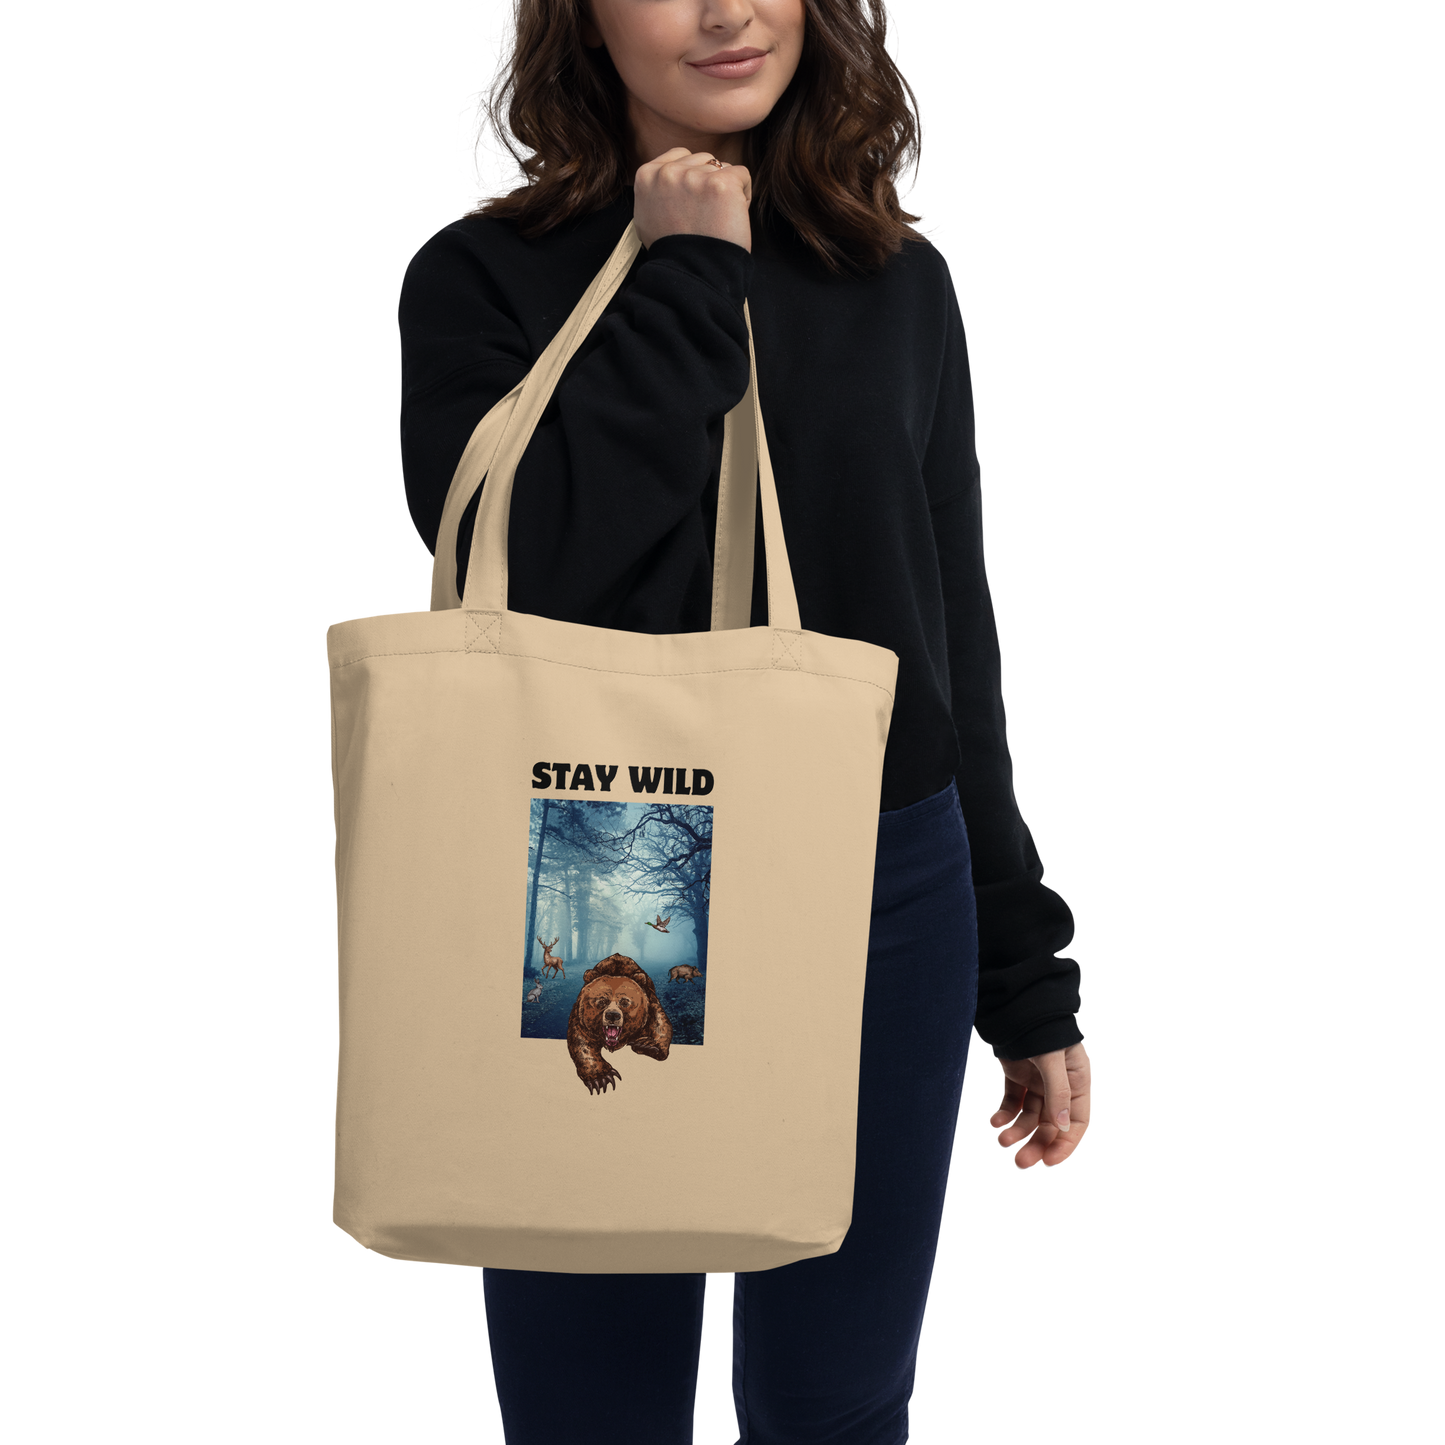 Woman carrying a Oyster Colored Bear Eco Tote Bag featuring a Stay Wild graphic - Cool Organic Cotton Totes - Boozy Fox